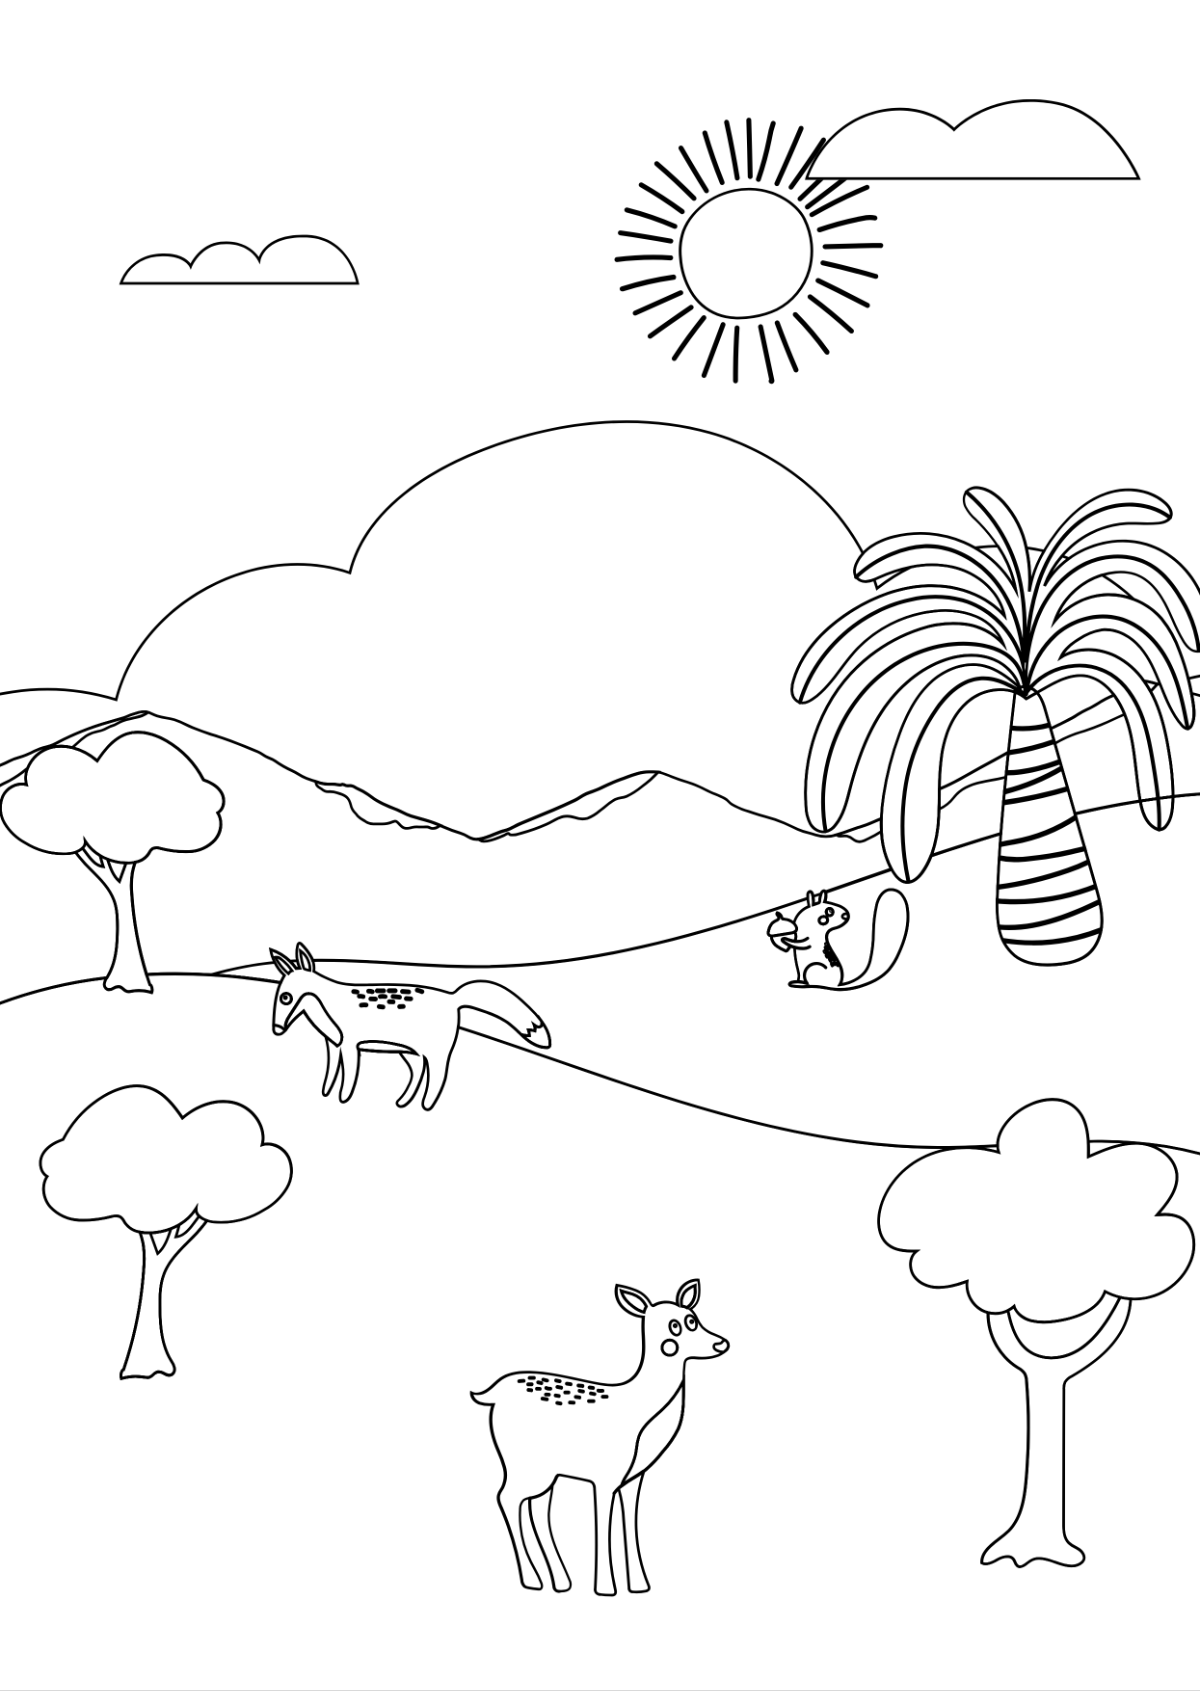 Free World Environment Day Drawing for Kids Template